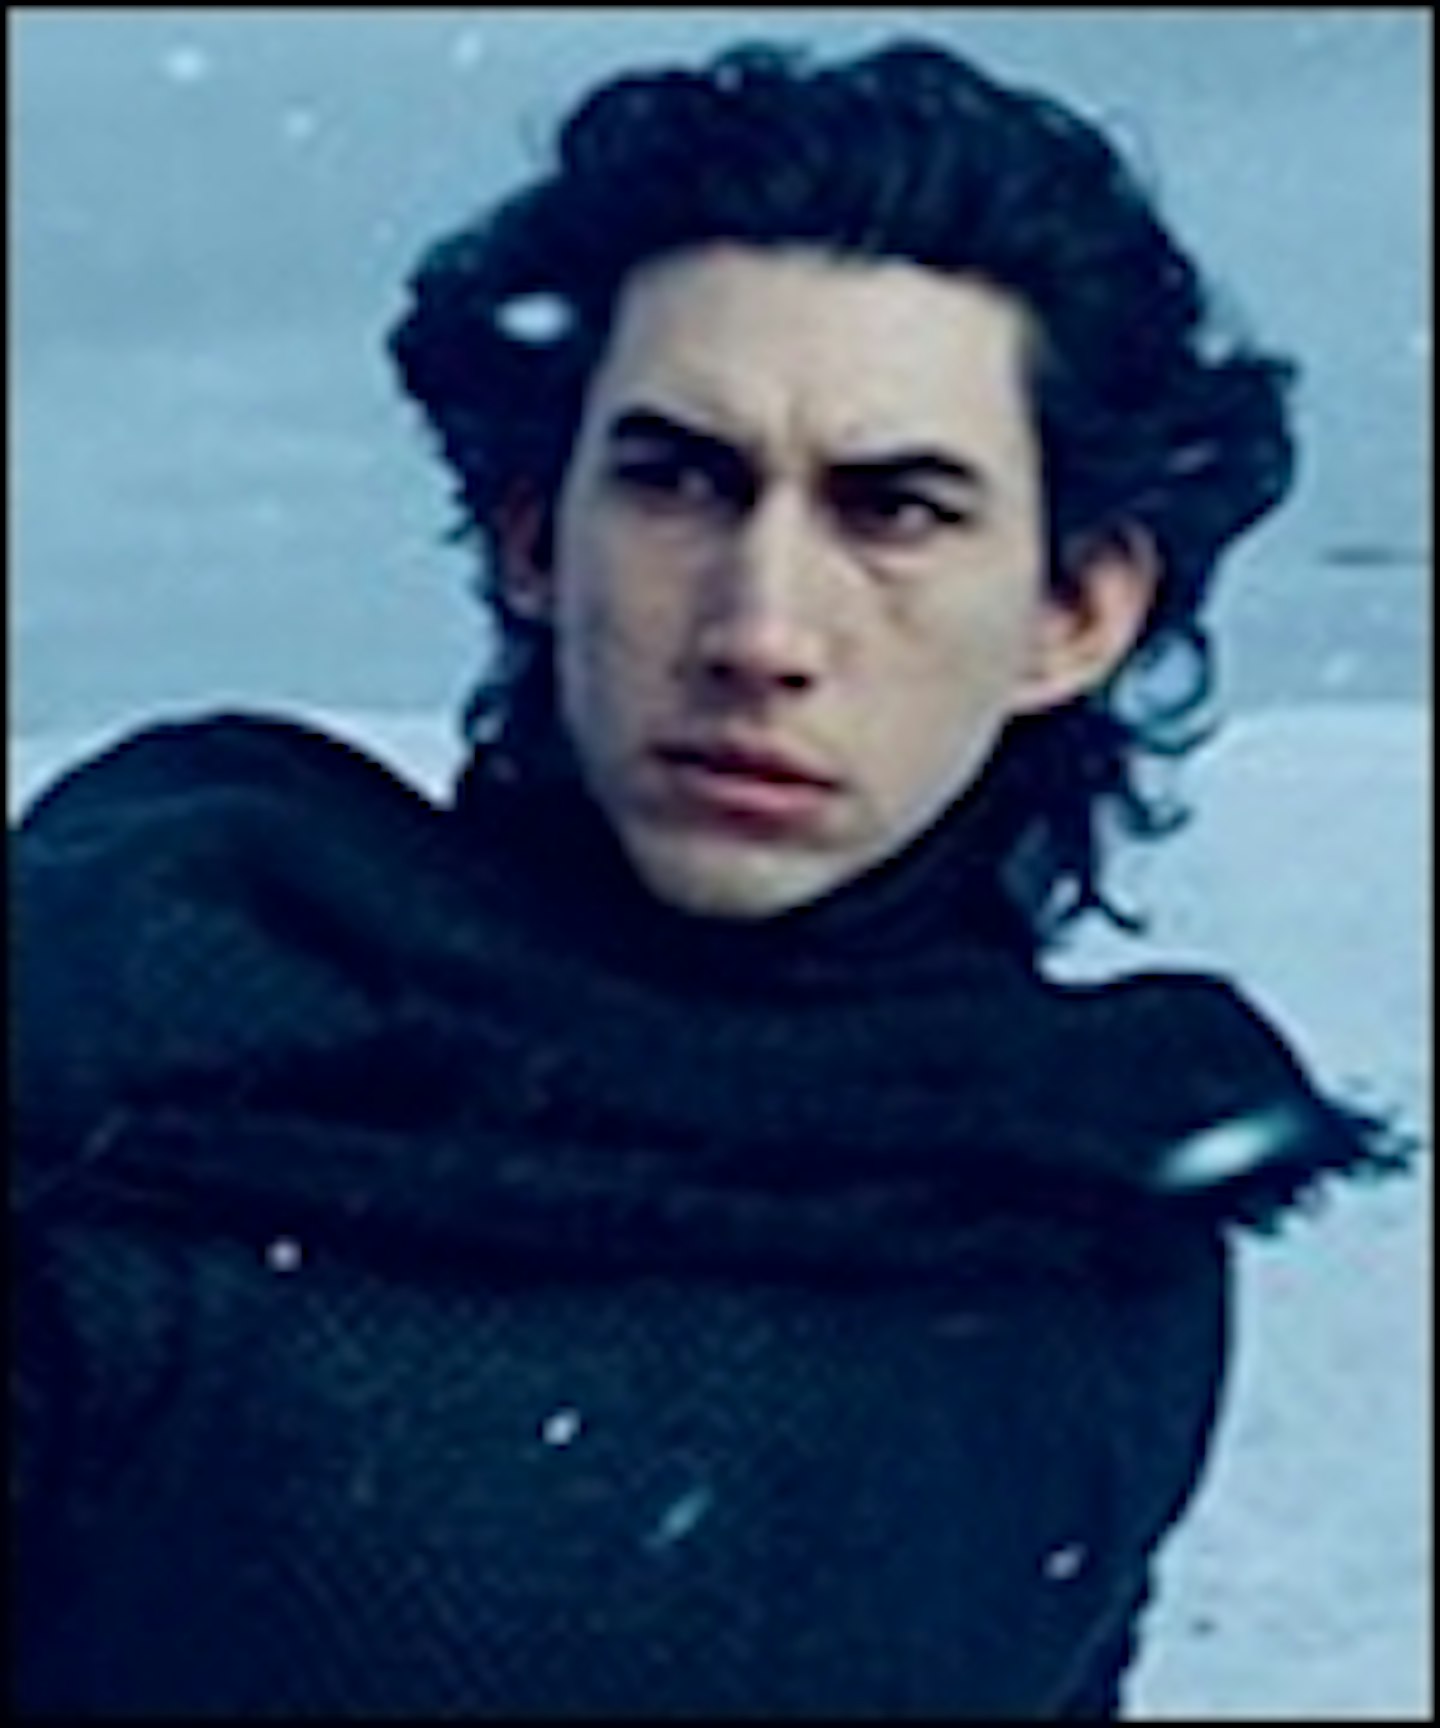 New Images Of The Force Awakens' Adam Driver And Lupita Nyong'o